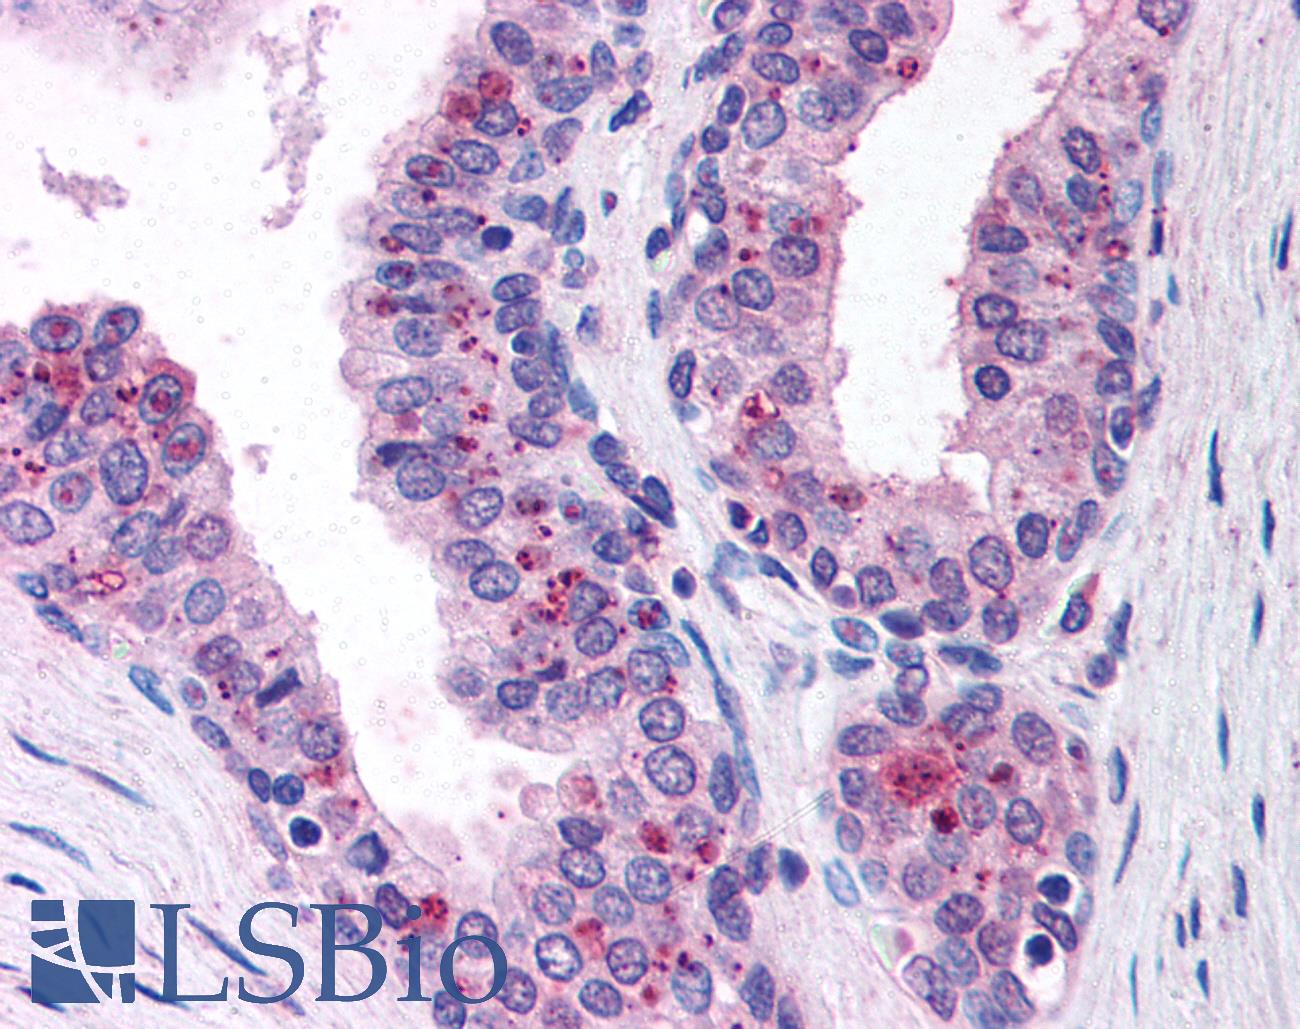 CASP9 / Caspase 9 Antibody - Anti-Caspase 9 antibody IHC of human prostate. Immunohistochemistry of formalin-fixed, paraffin-embedded tissue after heat-induced antigen retrieval. Antibody dilution 1:50.